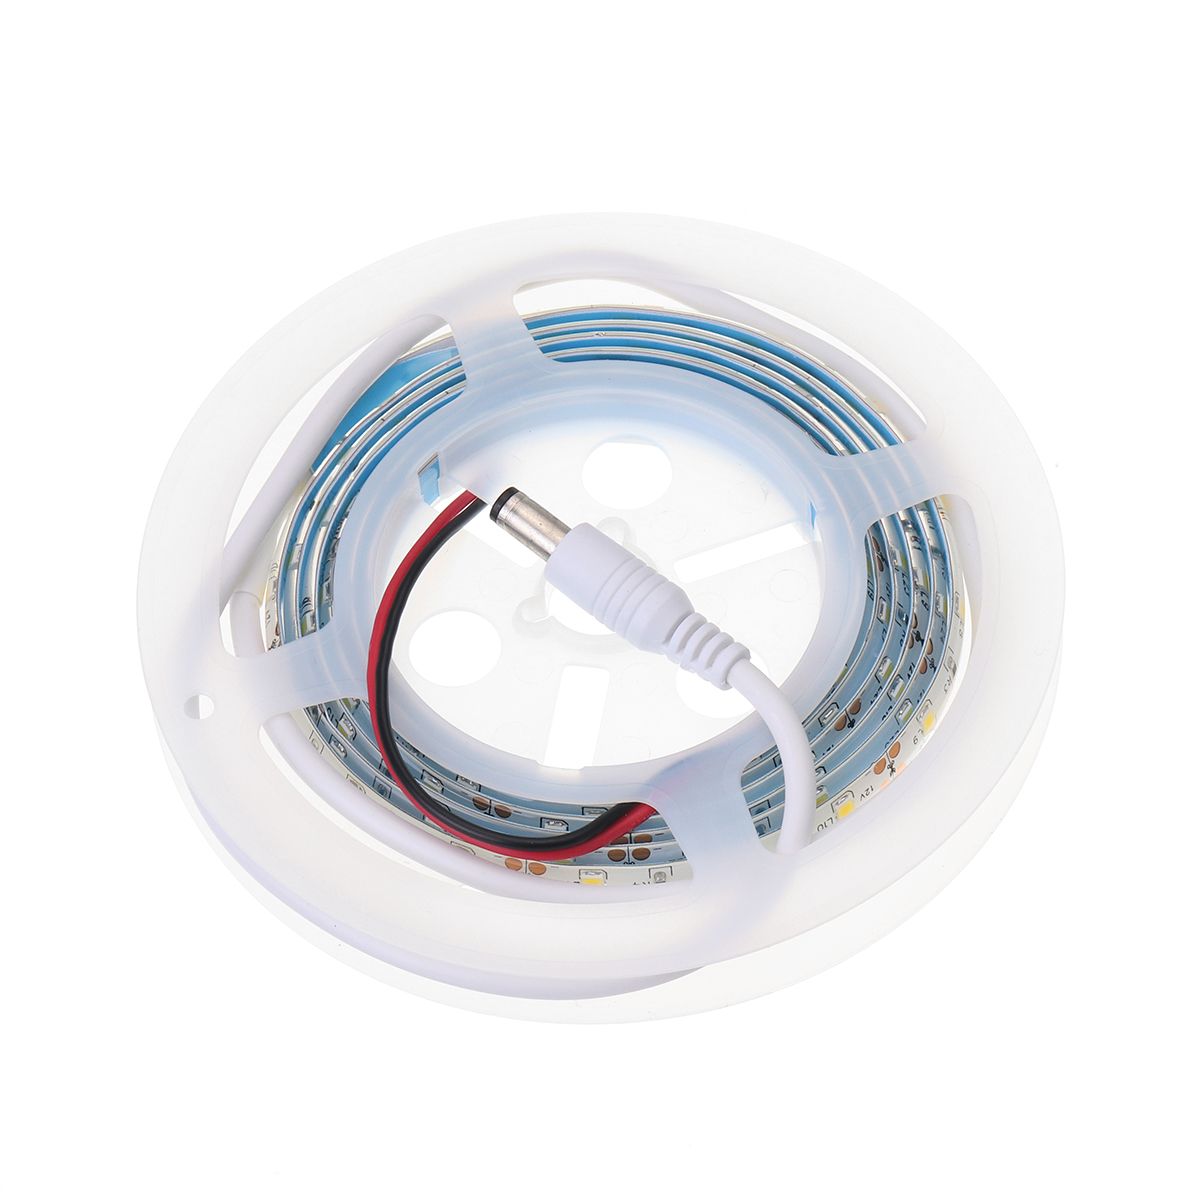 15M-3M-Motion-Activated-Sensor-Flexible-LED-Strip-Light-Bed-Night-Lamp-with-Switch-EU-Plug-DC12V-1298415